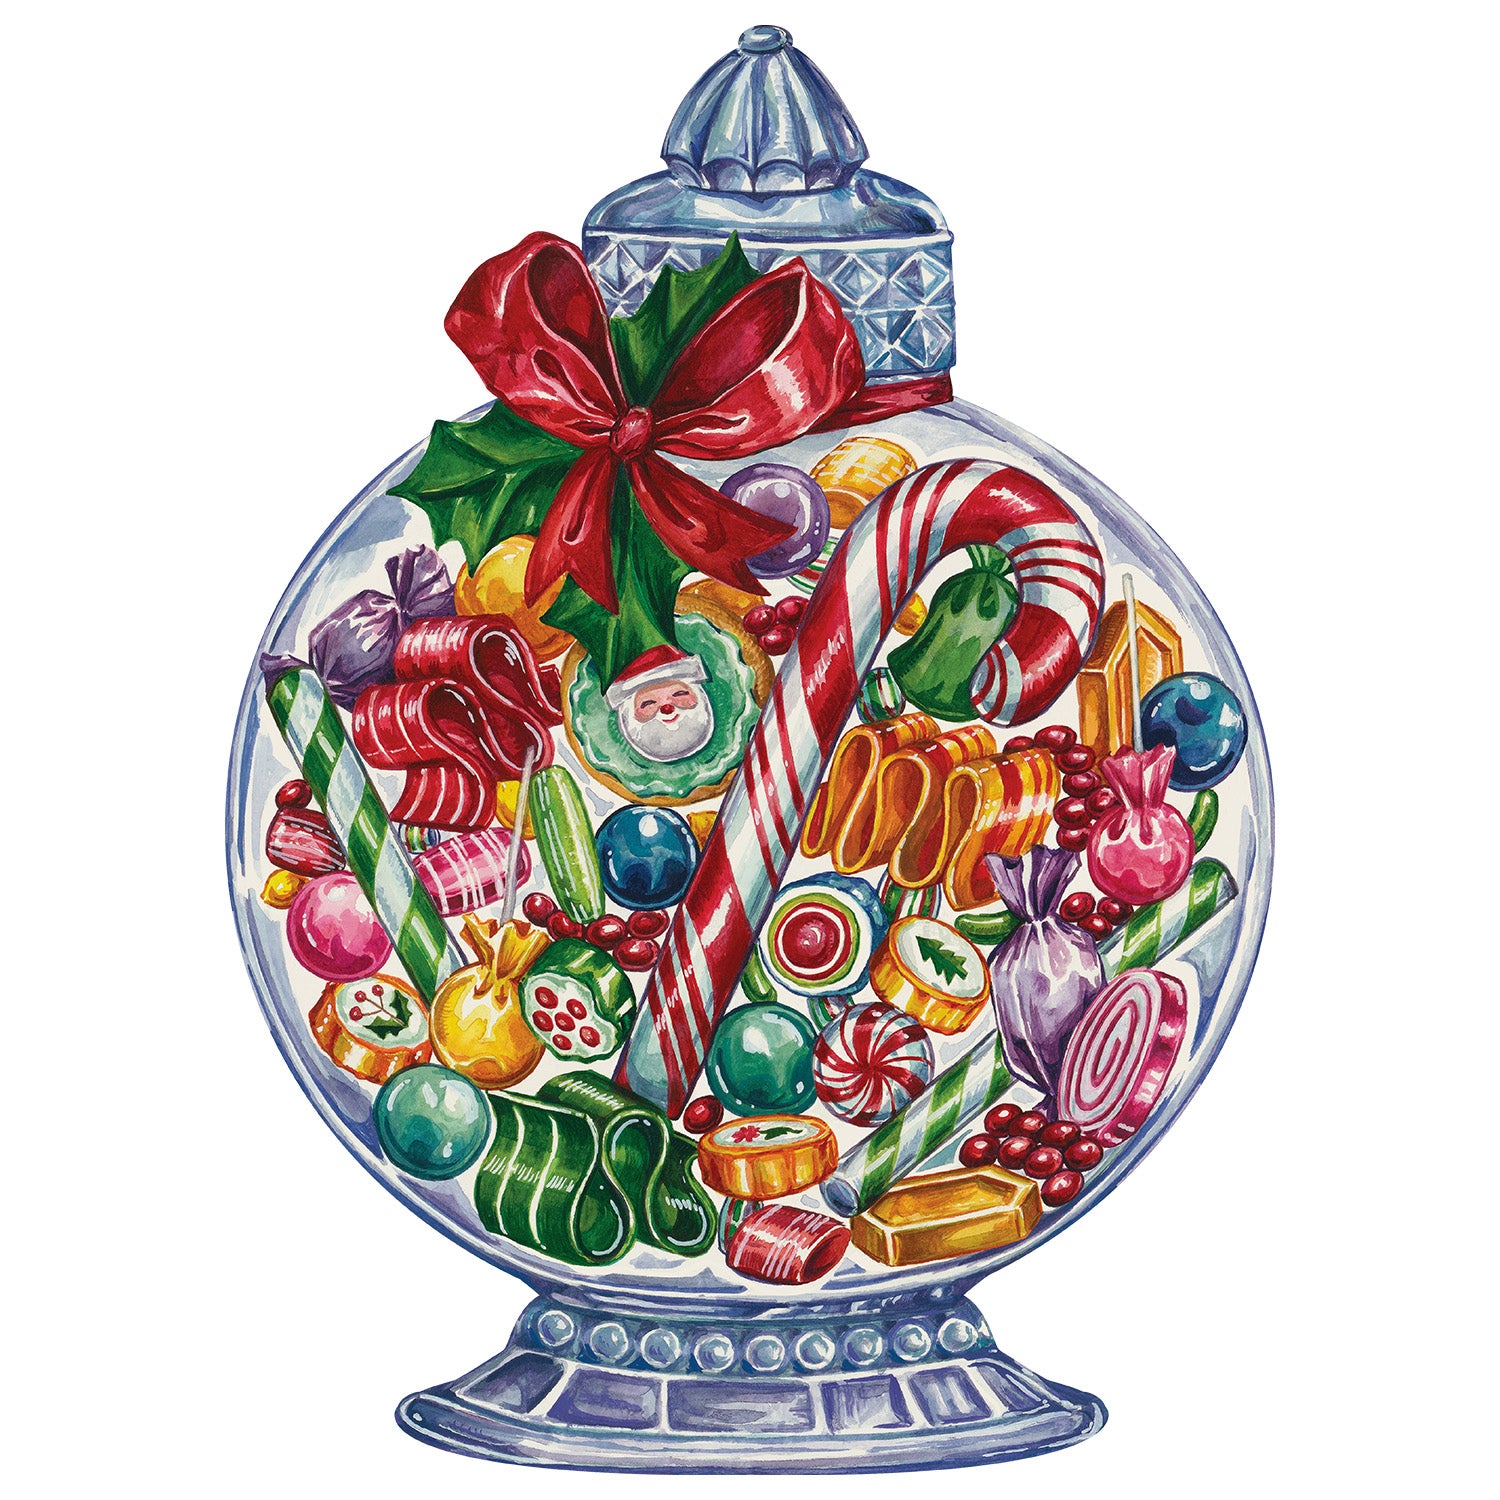 Paper placemat in shape of a large vintage candy jar filled with candy